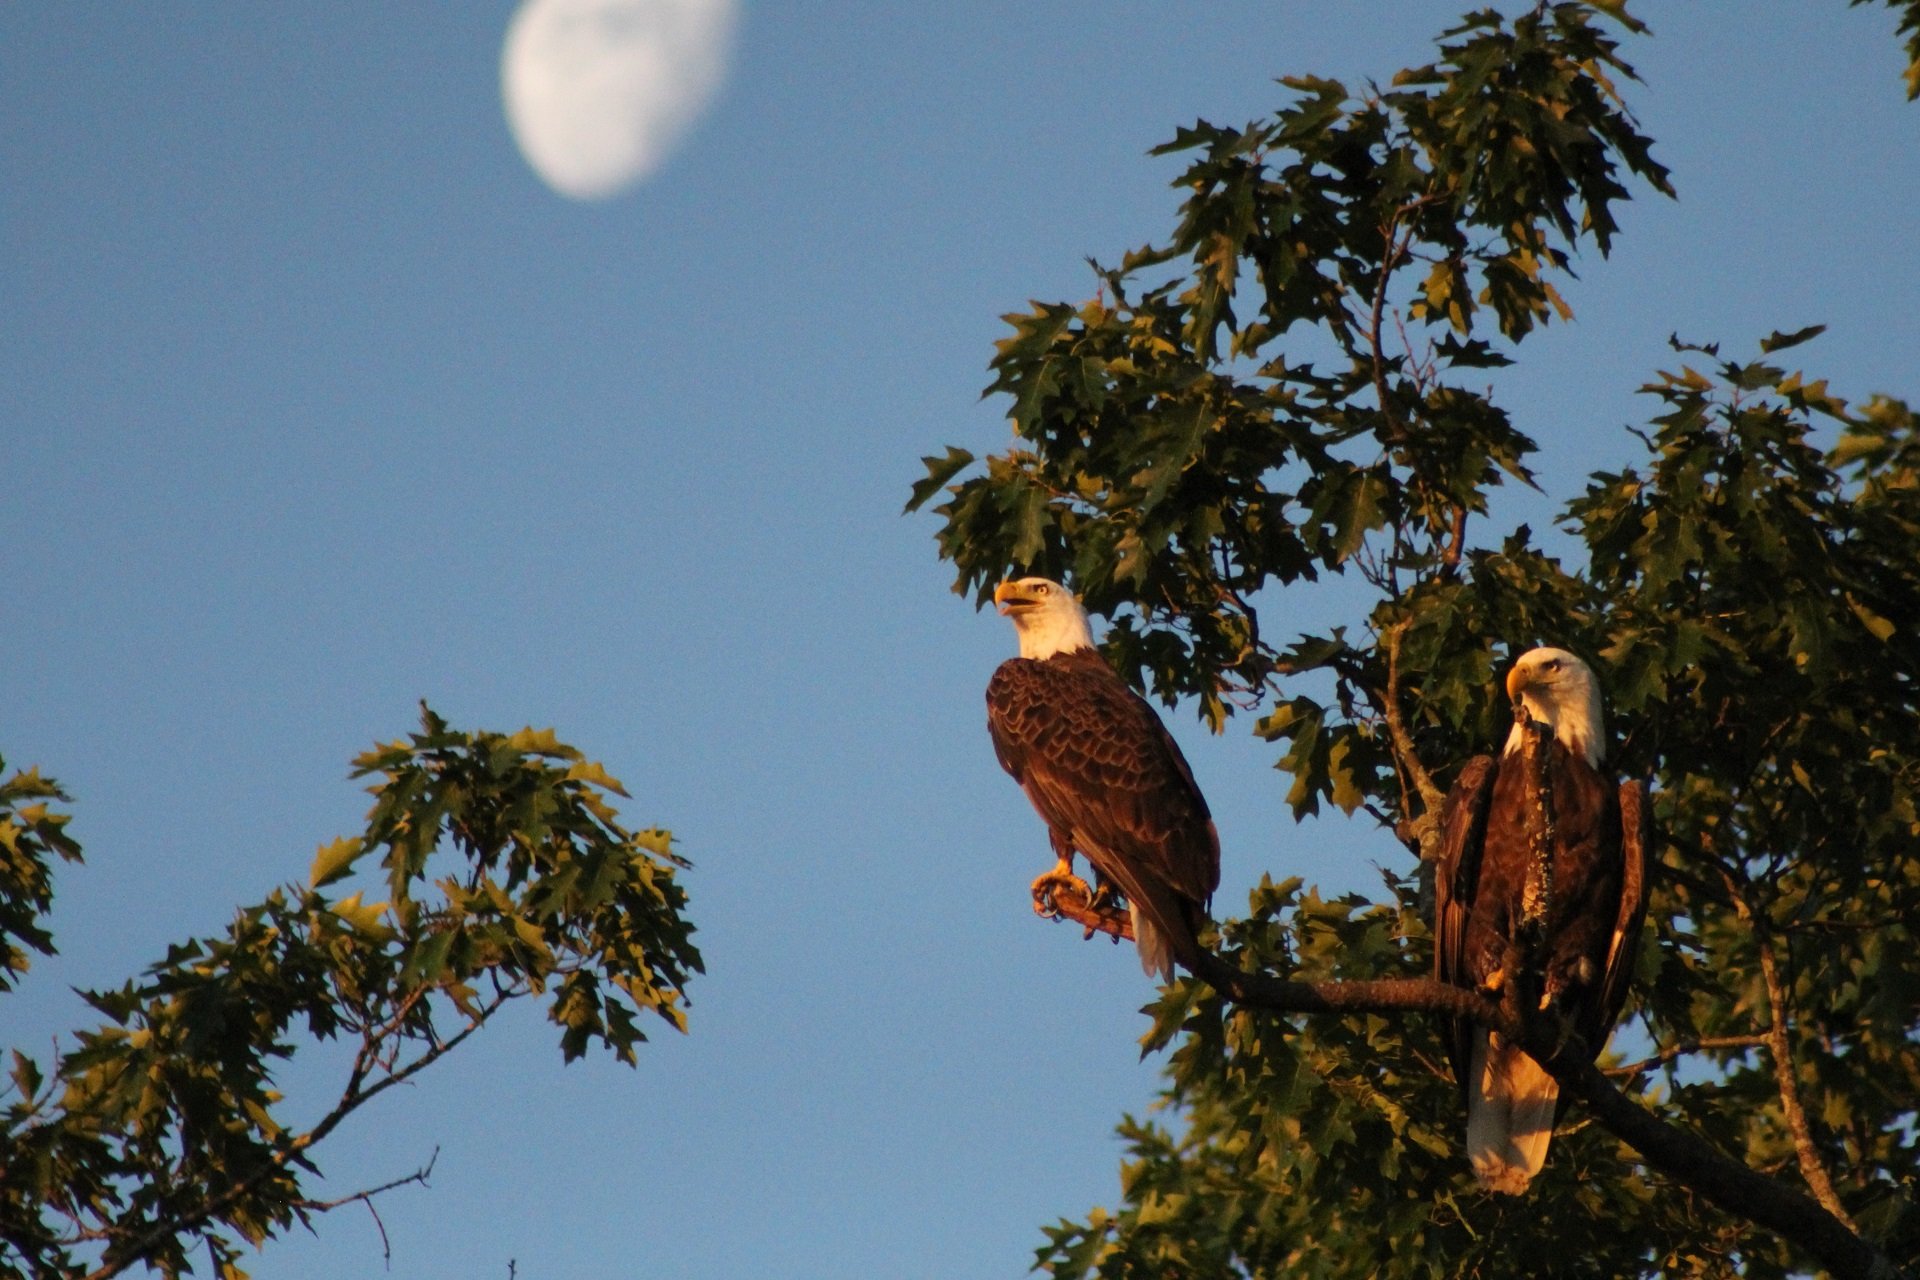 Two bald eagles perch in a tree. A waning moon is in the blue sky behind them.